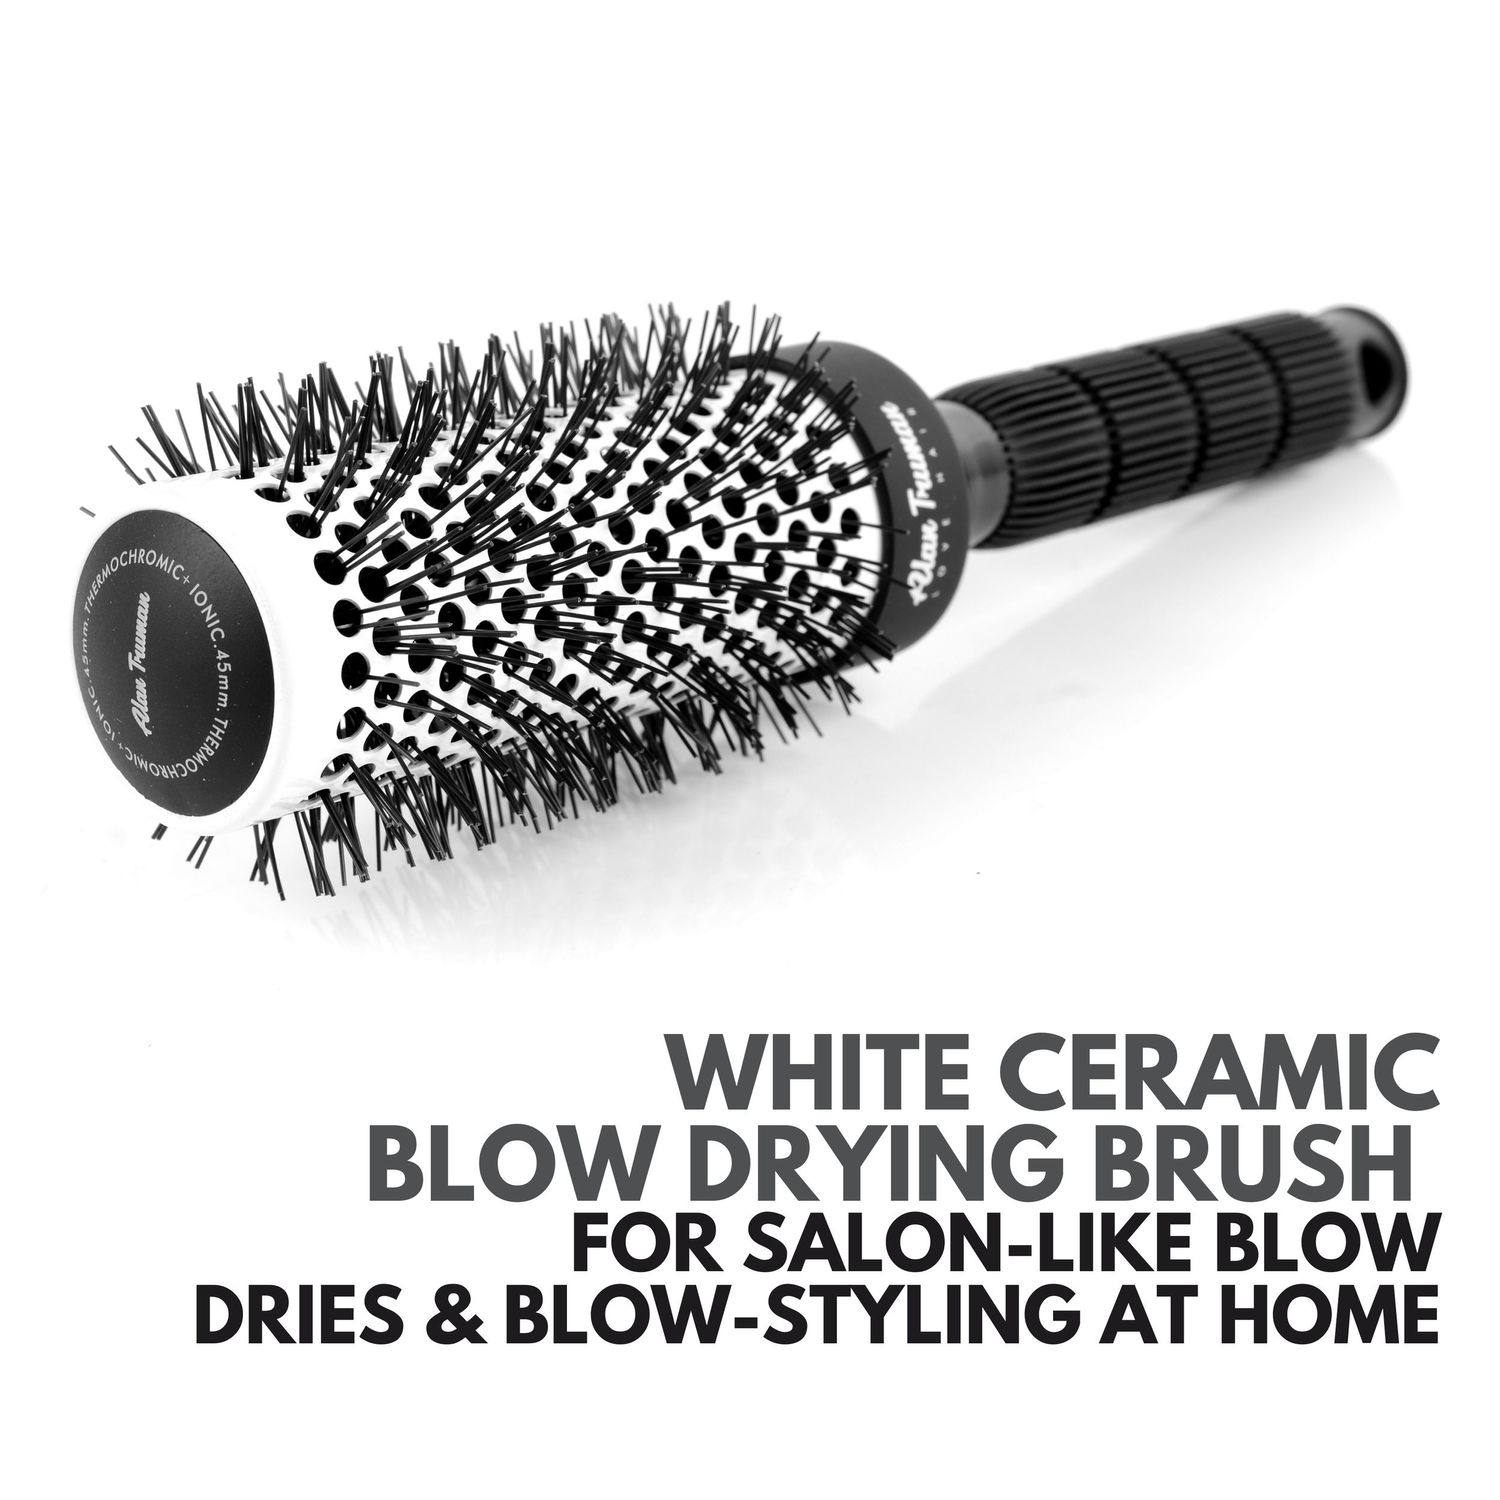 Top 10 Brushes For Blow Drying At Home | Hair Dryer Brush